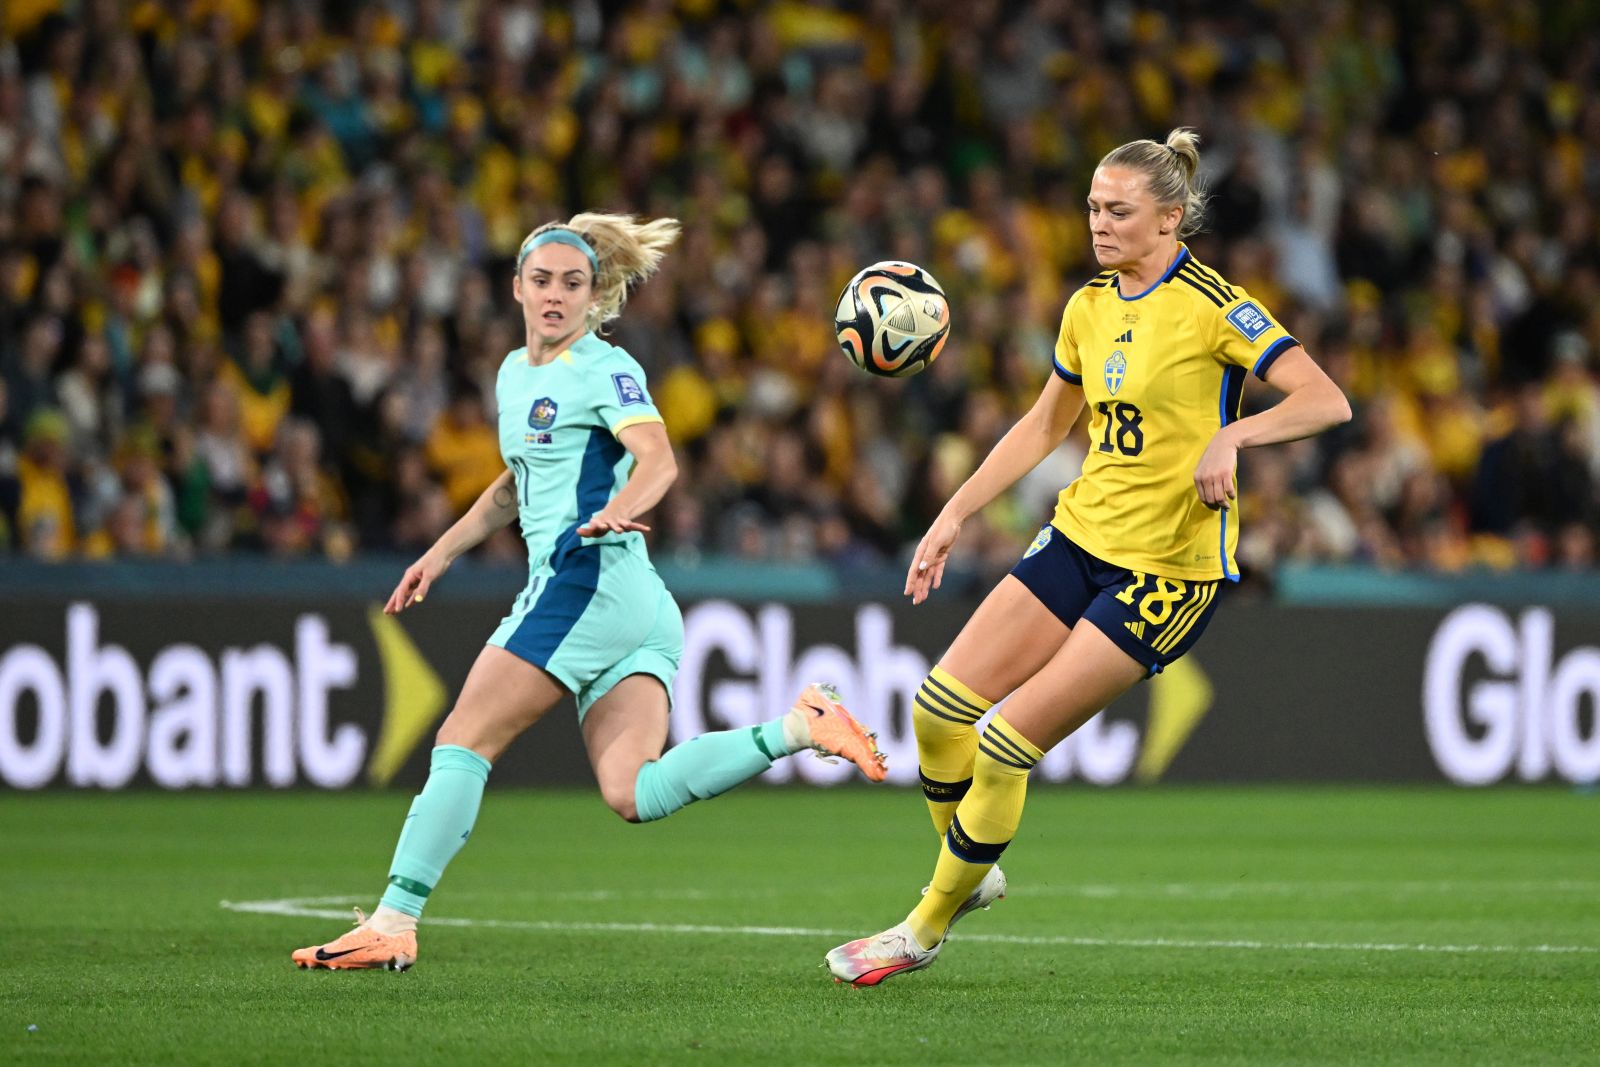 epa10806673 Fridolina Rolfo (R) of Sweden and Ellie Carpenter (L) of Australia in action during the FIFA Women's World Cup 2023 Third Place match between Sweden and Australia, in Brisbane, Australia, 19 August 2023.  EPA/DARREN ENGLAND AUSTRALIA AND NEW ZEALAND OUT  EDITORIAL USE ONLY